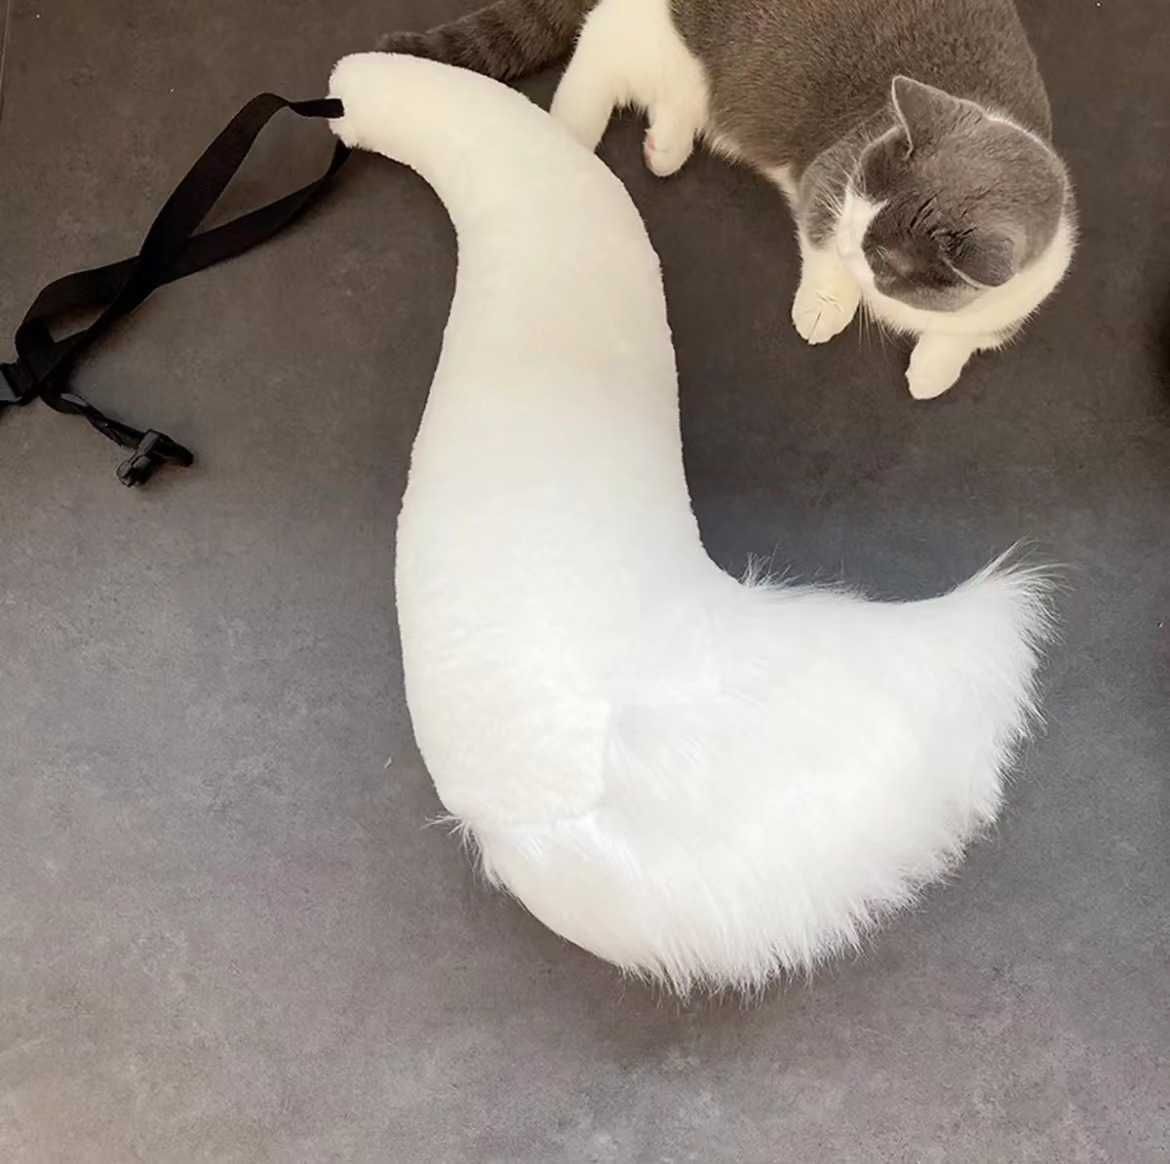 a tail